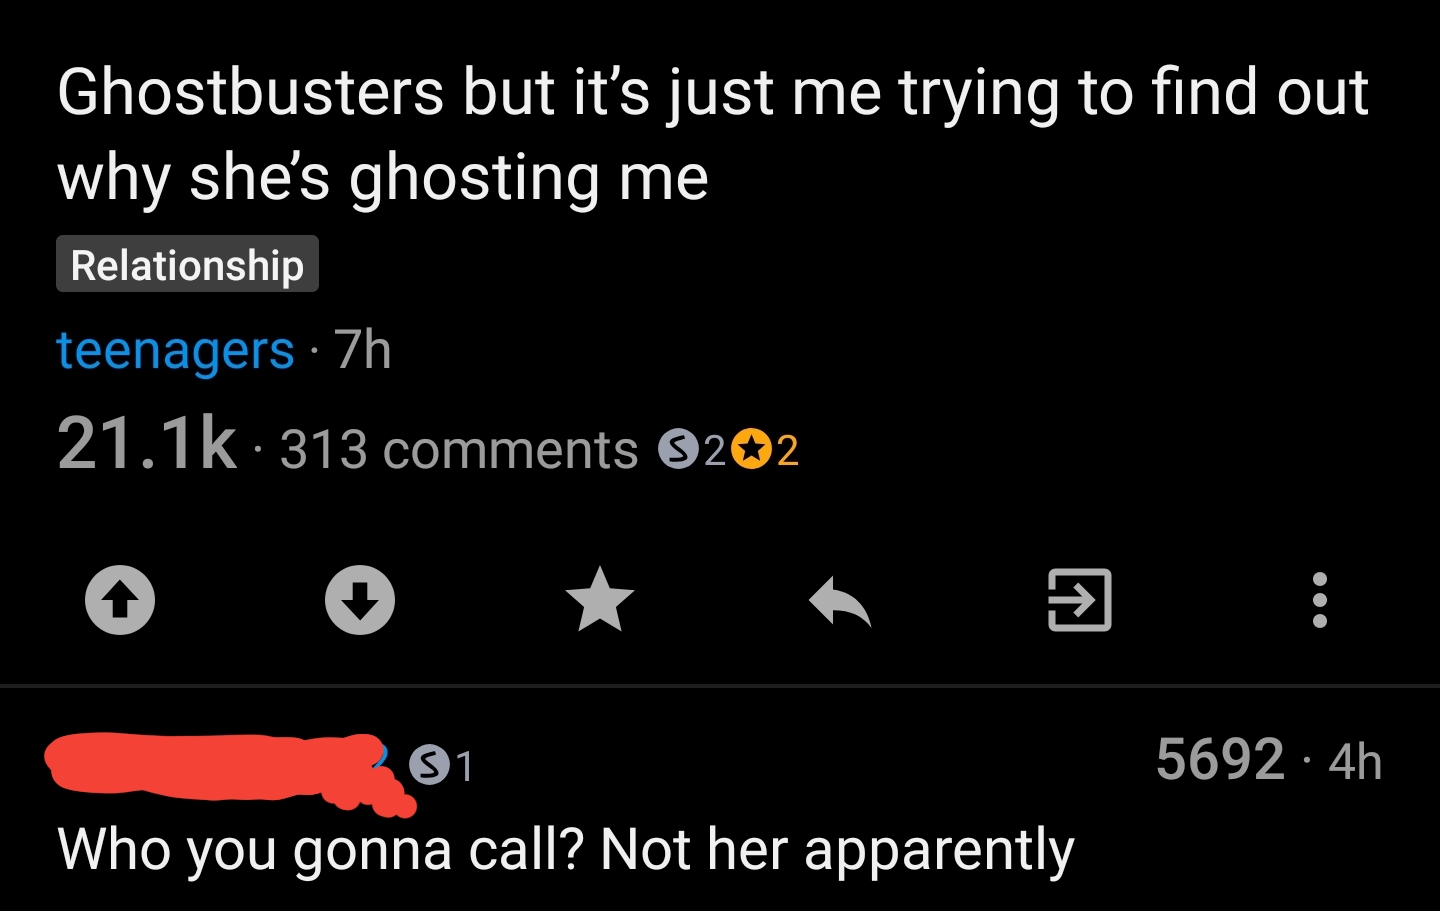 angle - Ghostbusters but it's just me trying to find out why she's ghosting me Relationship teenagers 7h 313 8202 $1. 56924h Who you gonna call? Not her apparently